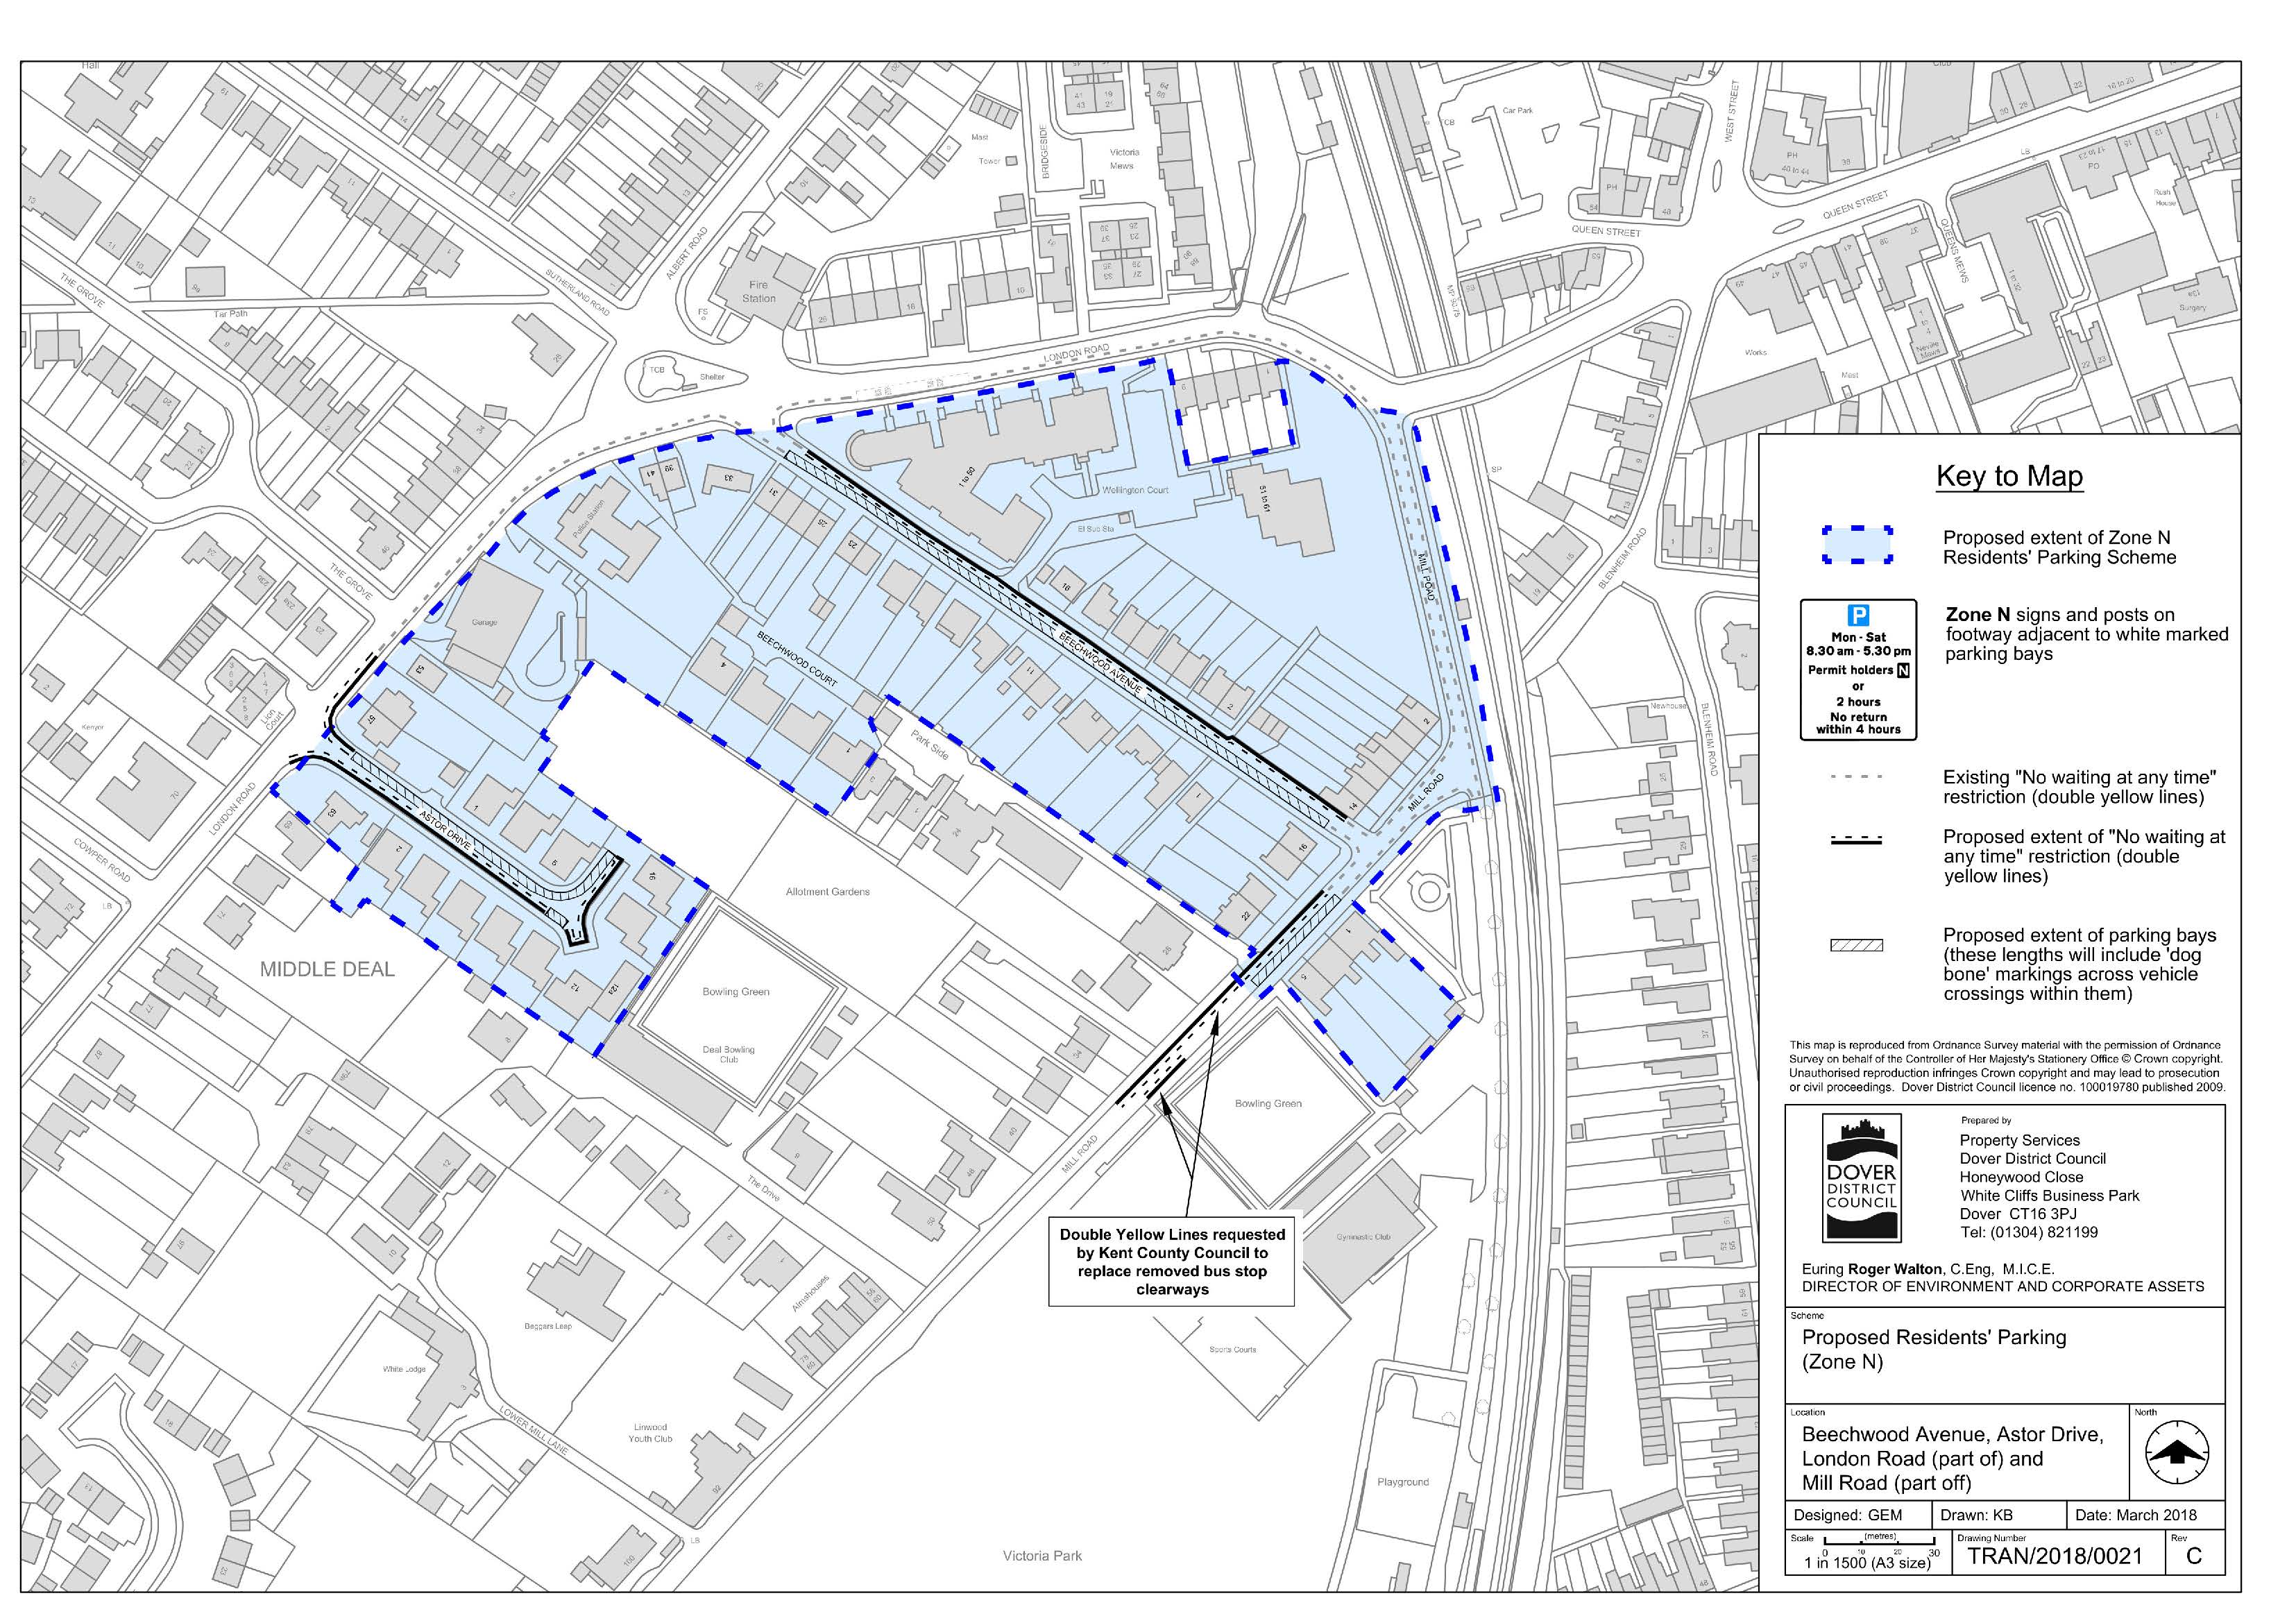 Map of proposed extent of Zone N residents' parking scheme in Deal, Kent. Location: Beechwood Avenue, Astor Drive, London Road (part of) and Mill Road (part of).